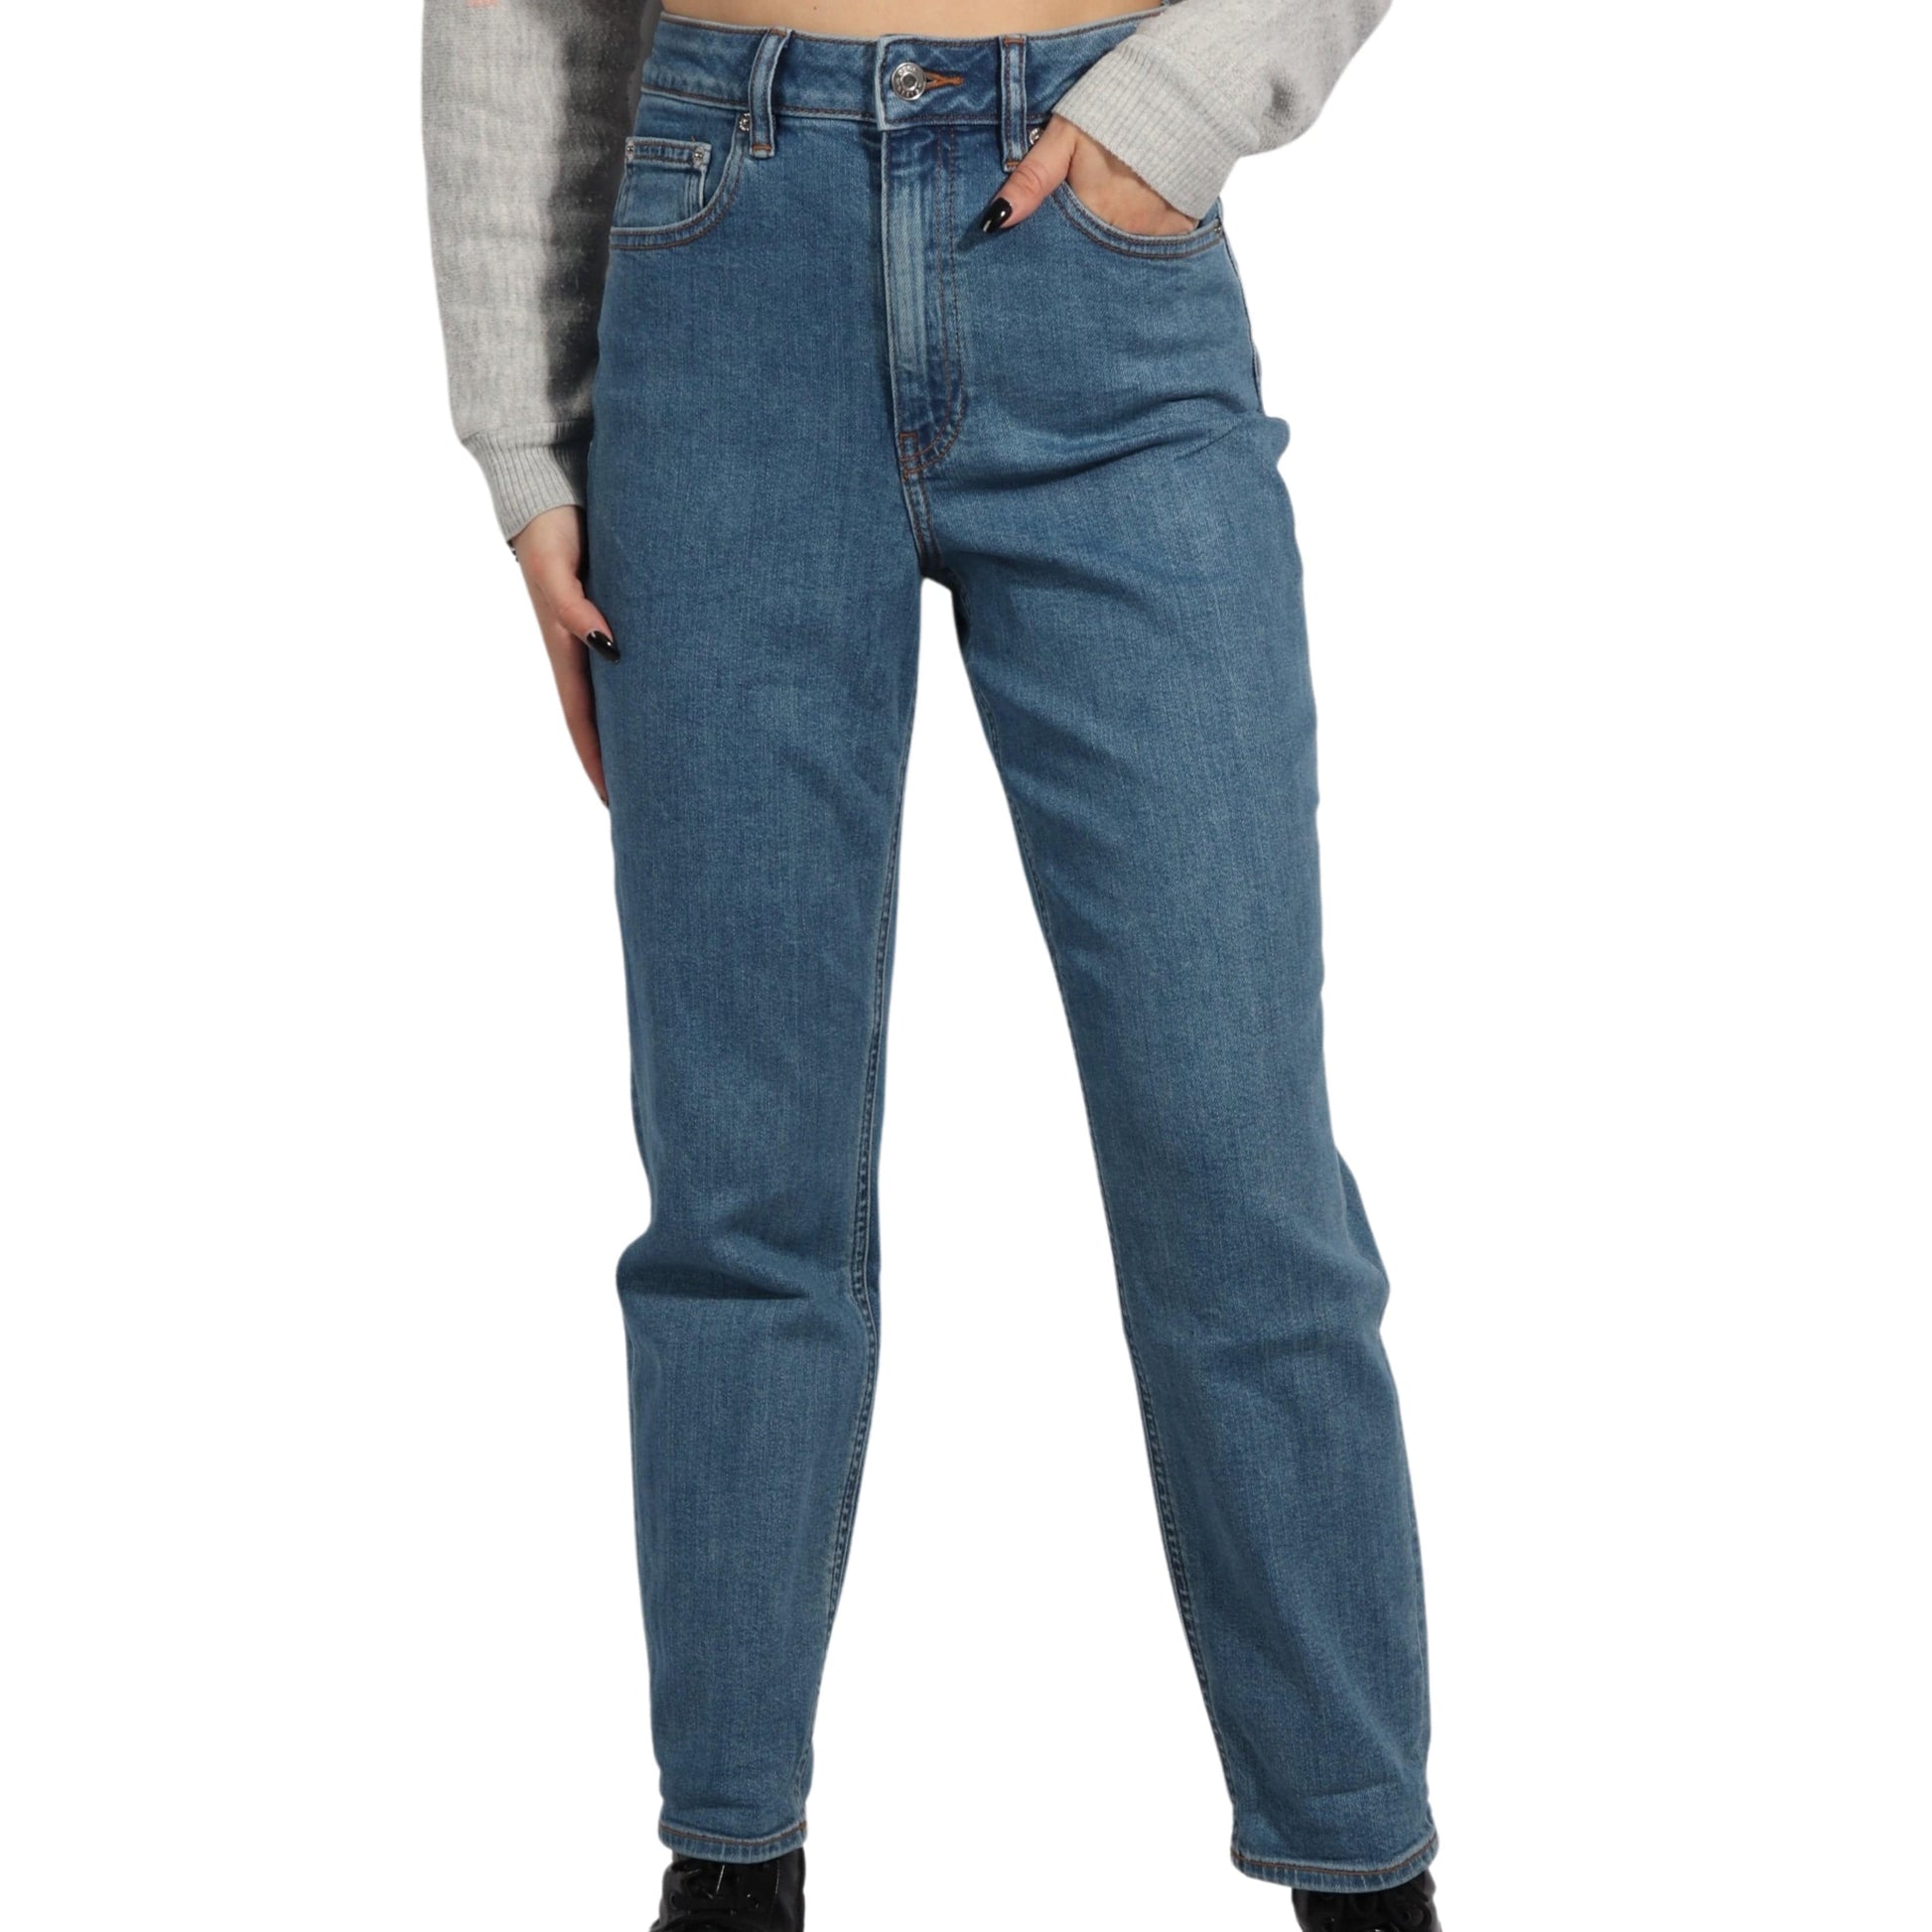 ASOS Womens Bottoms ASOS - Very Simple Jeans